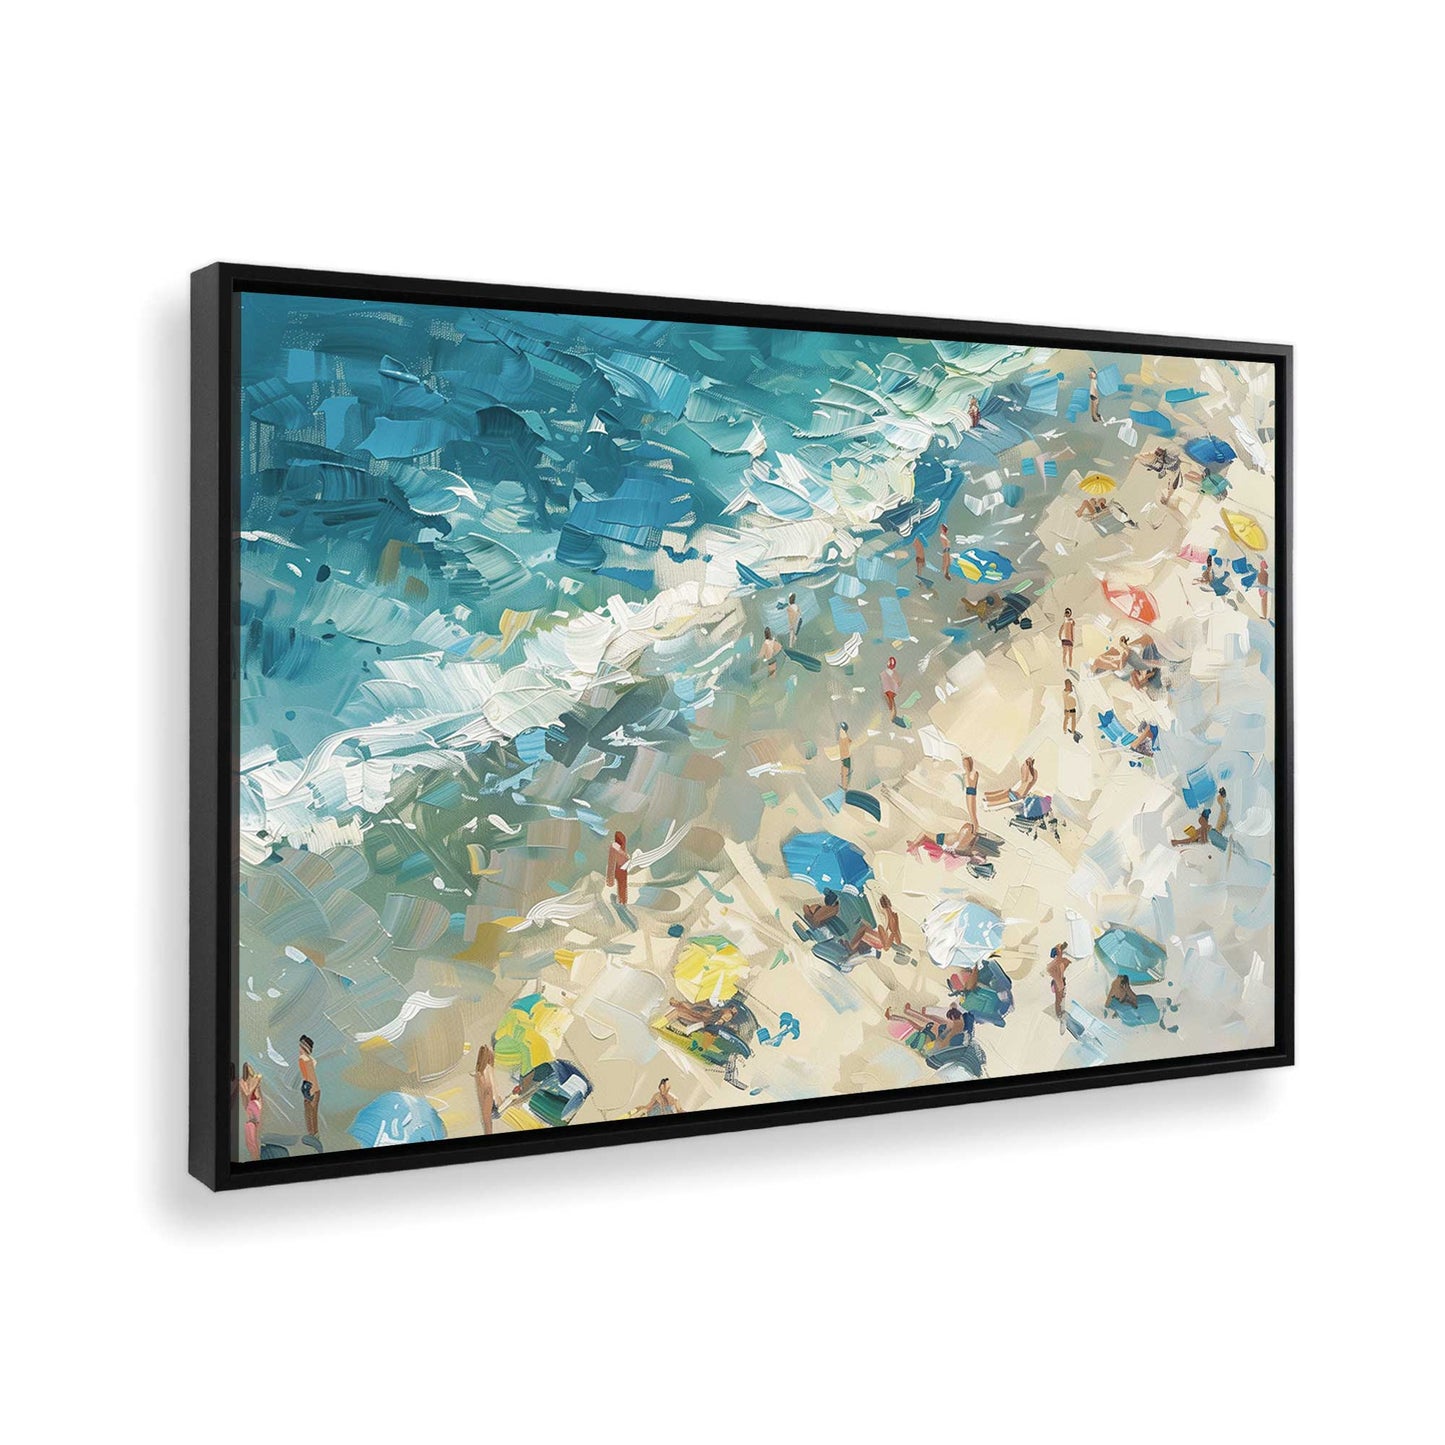 [Color:Satin Black],[shape:rectangle] Picture of art in a Satin Black frame at an angle